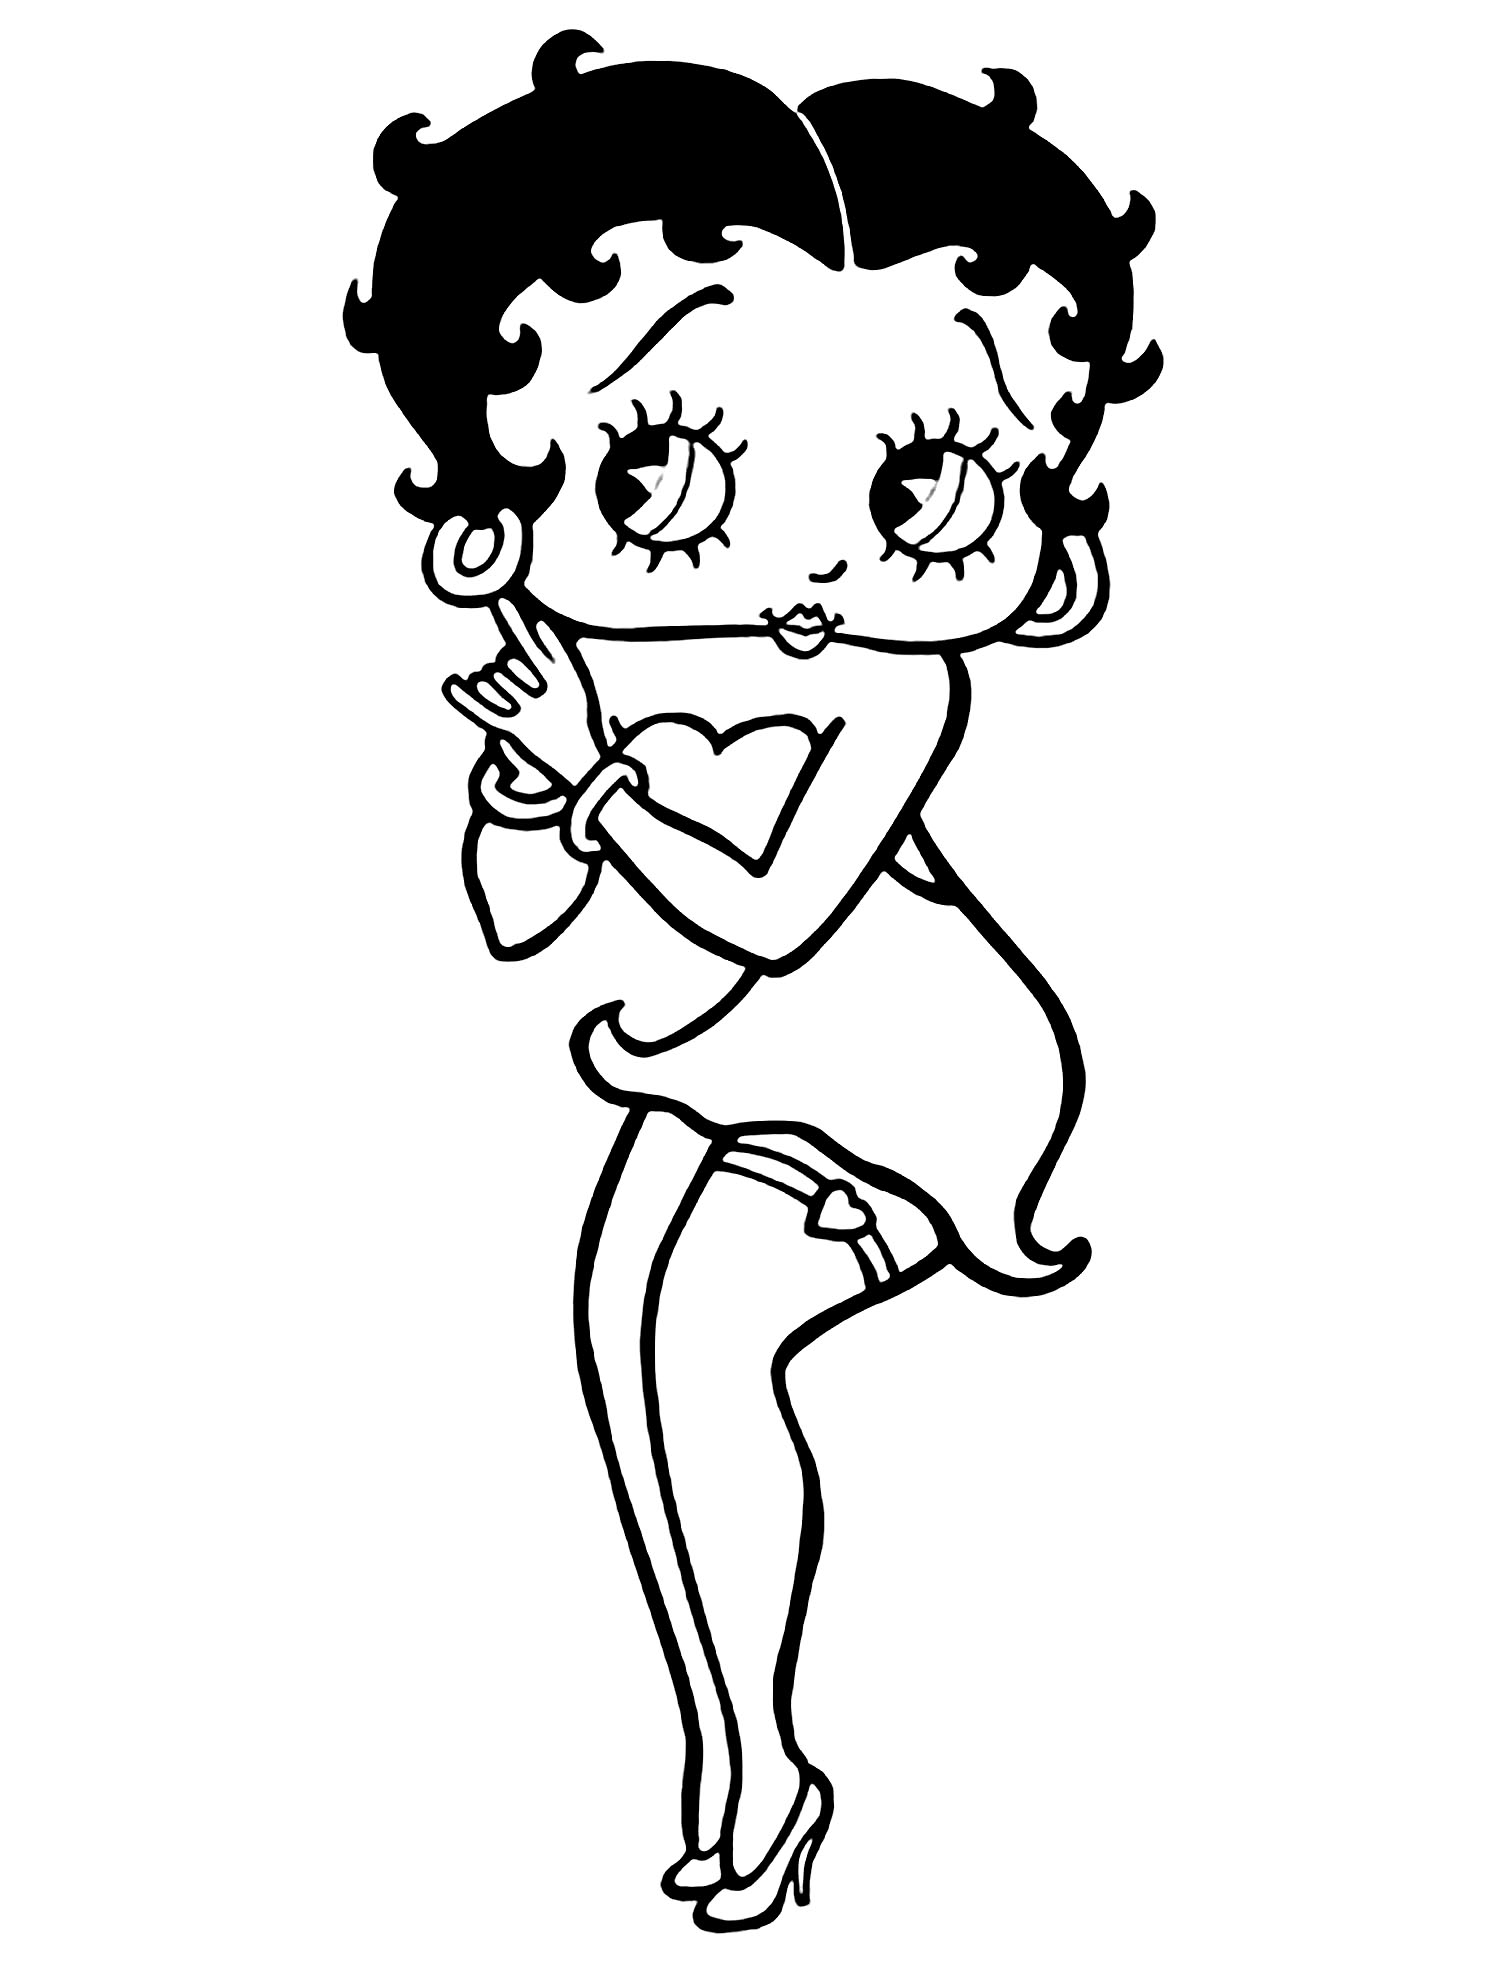 Betty Boop Coloring Pages To Print Betty Boop Kids Coloring Pages - Free Printable Betty Boop